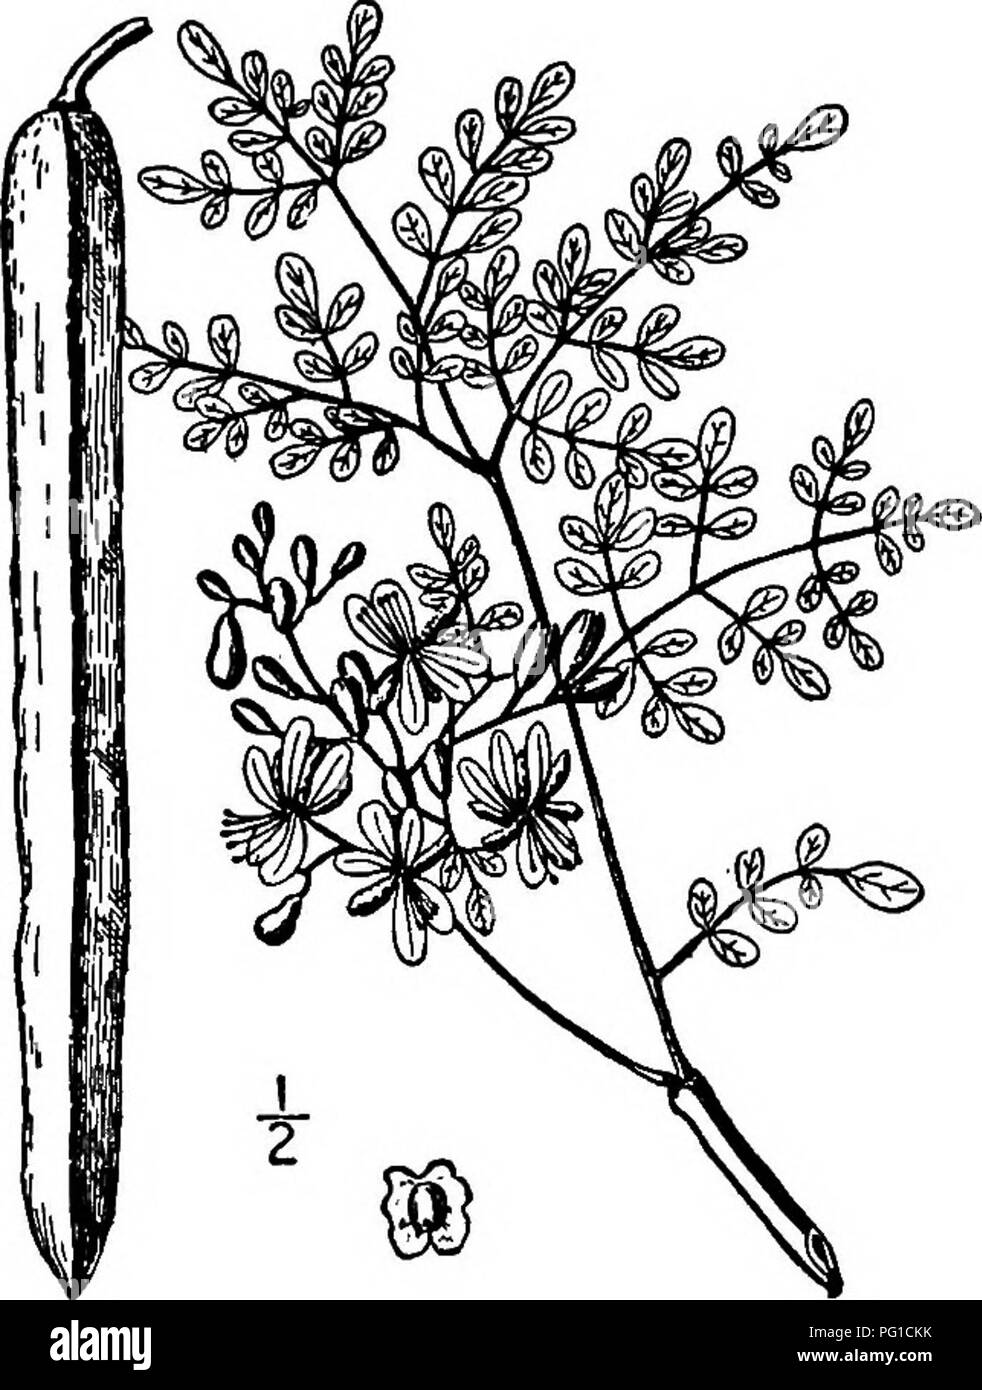 . North American trees : being descriptions and illustrations of the trees growing independently of cultivation in North America, north of Mexico and the West Indies . Trees. THE HORSE RADISH TREE FAMILY MORINGACE^ Dumont GENUS MORINGA LAMARCK Species Moringa Morioga (Linnaeus) Small Guilandina Moringa Linnaeus. Moringa pterygosperma Gaertner ORINGA, or Horse-radish tree, the type of the genus Moringa, so called on account of the pungent taste and odor of its roots, is a native of India, has long been cultvated in tropical countries, and has escaped from cultivation in Florida and the West Ind Stock Photo